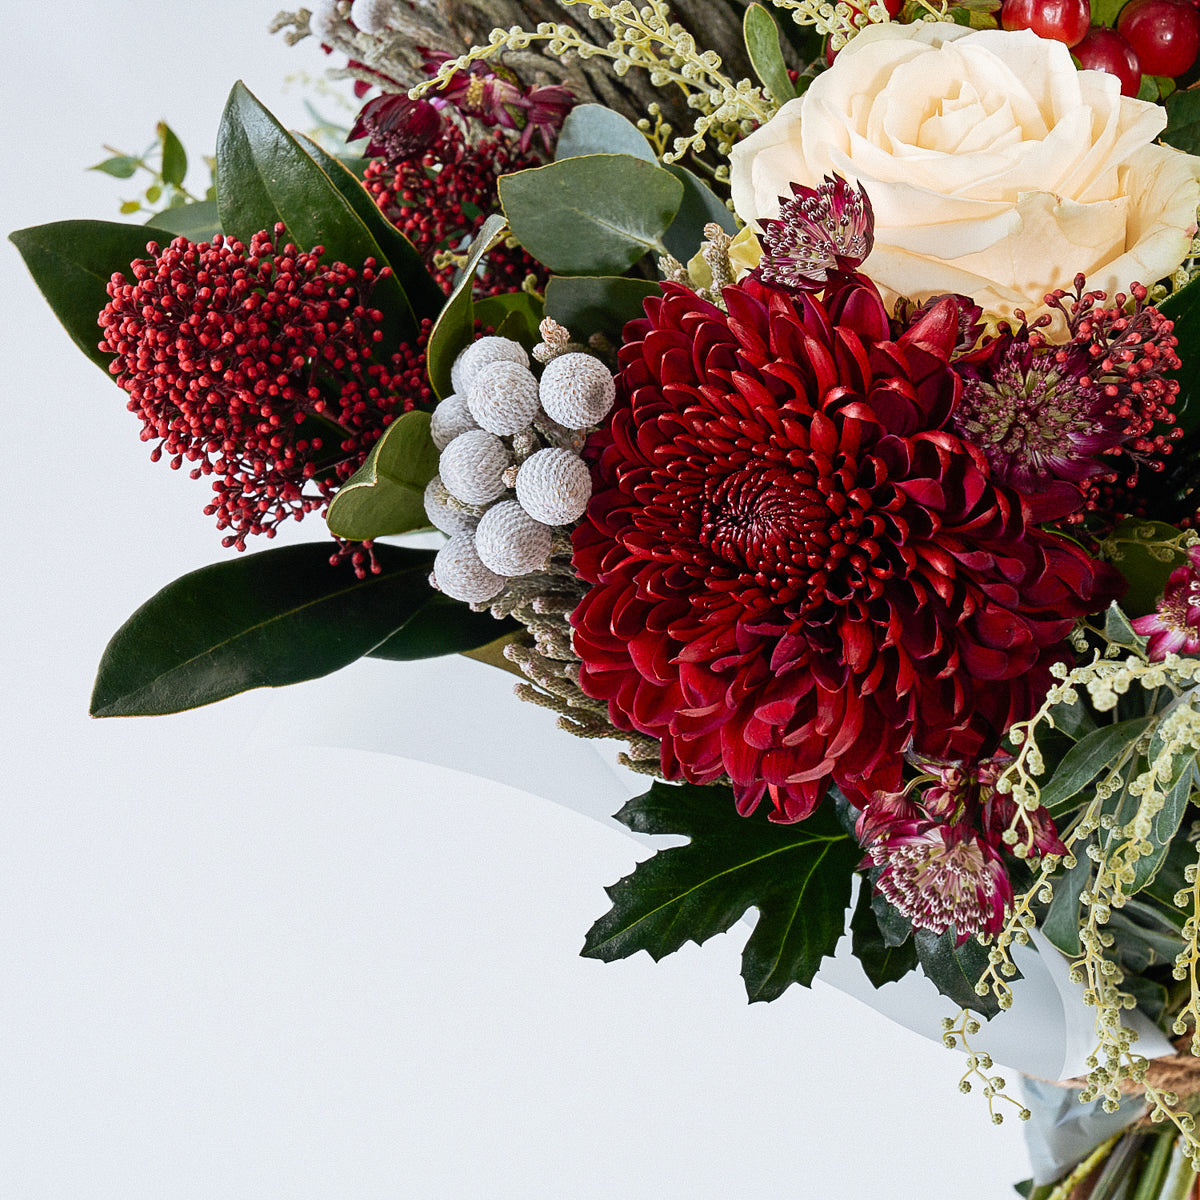 Noel Christmas bouquet with burgundy flowers, white roses and berries